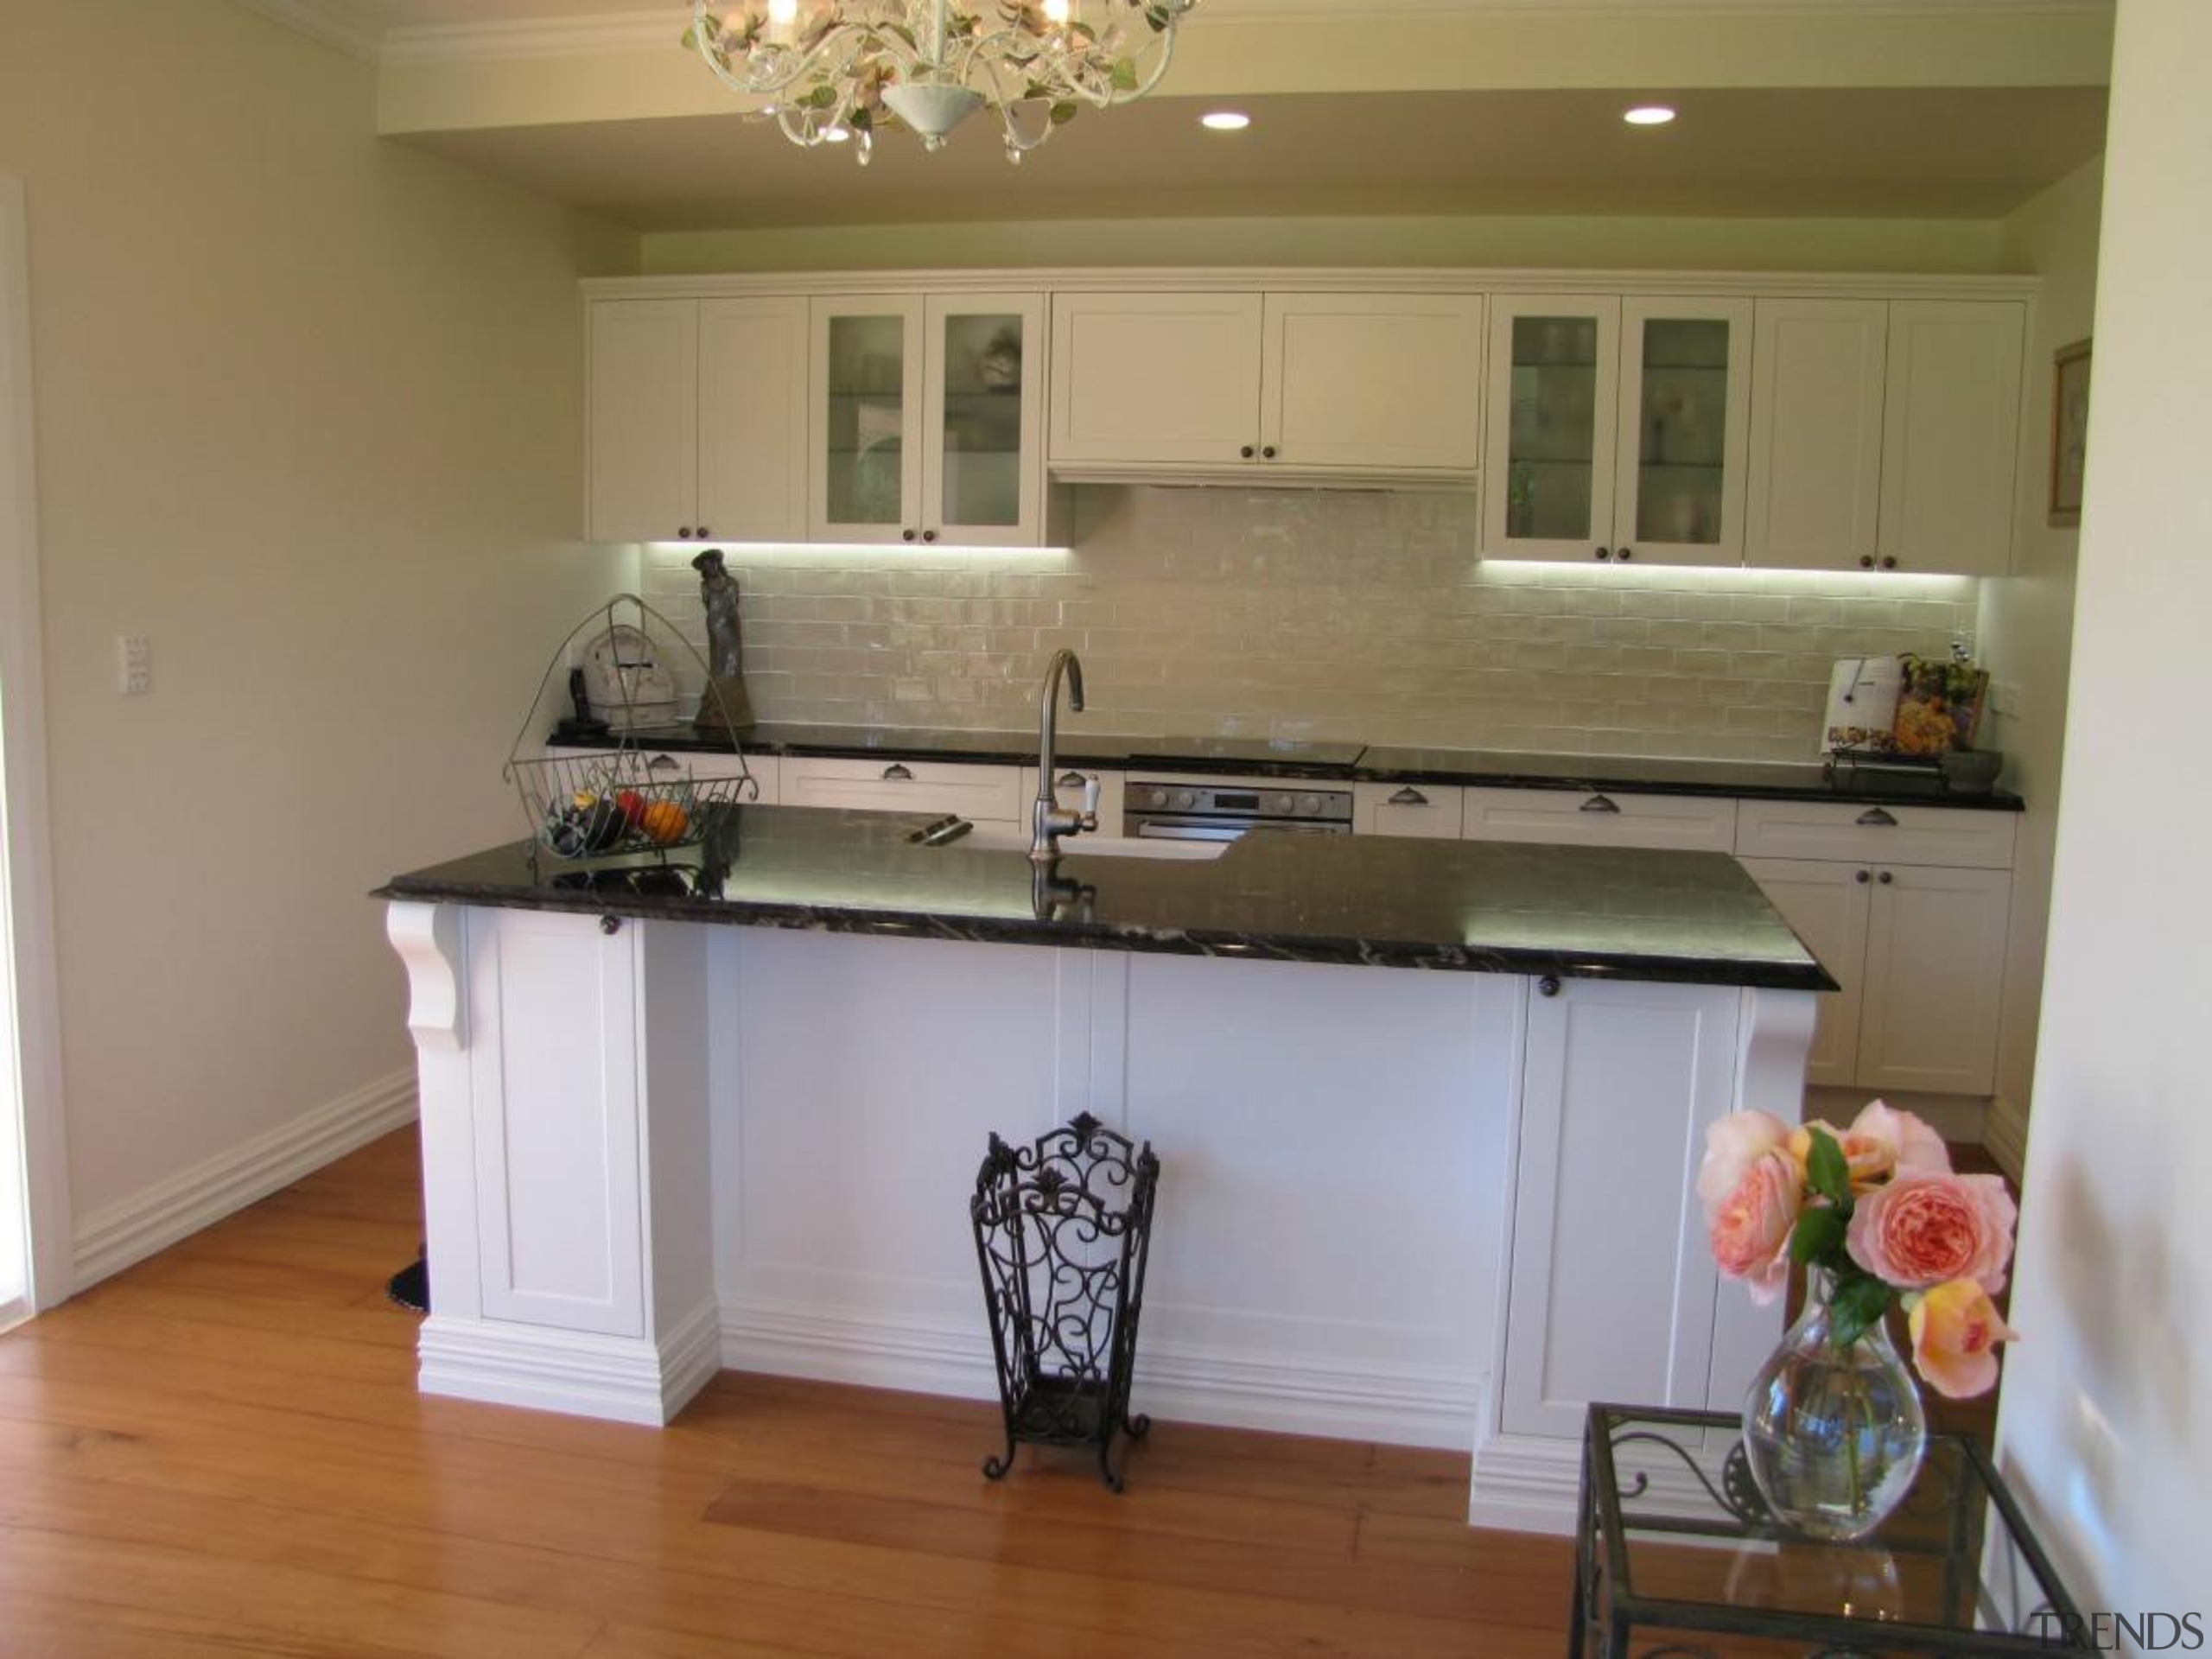 Elite Kitchens and Cabinets create elegant kitchens that cabinetry, countertop, floor, flooring, furniture, kitchen, real estate, room, brown, gray